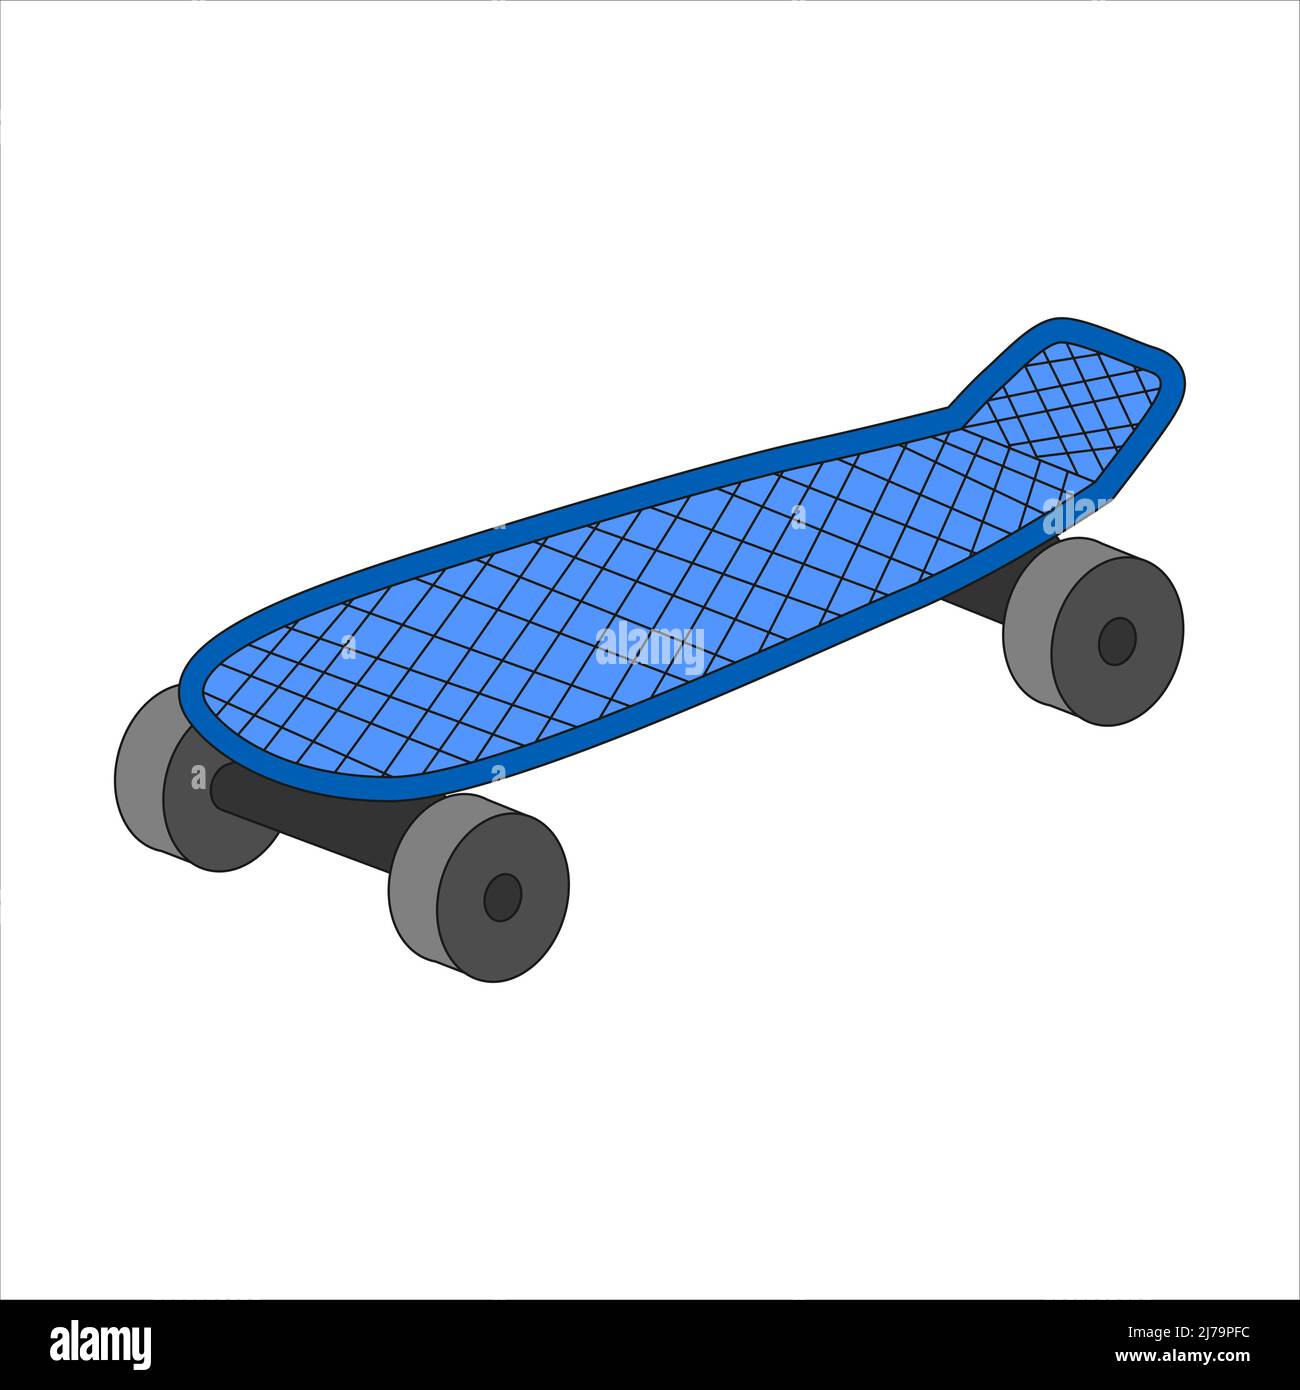 Skateboard, Street youth transport. Doodle vector illustration isolated on white background. Decorative element with a stroke. Stock Vector